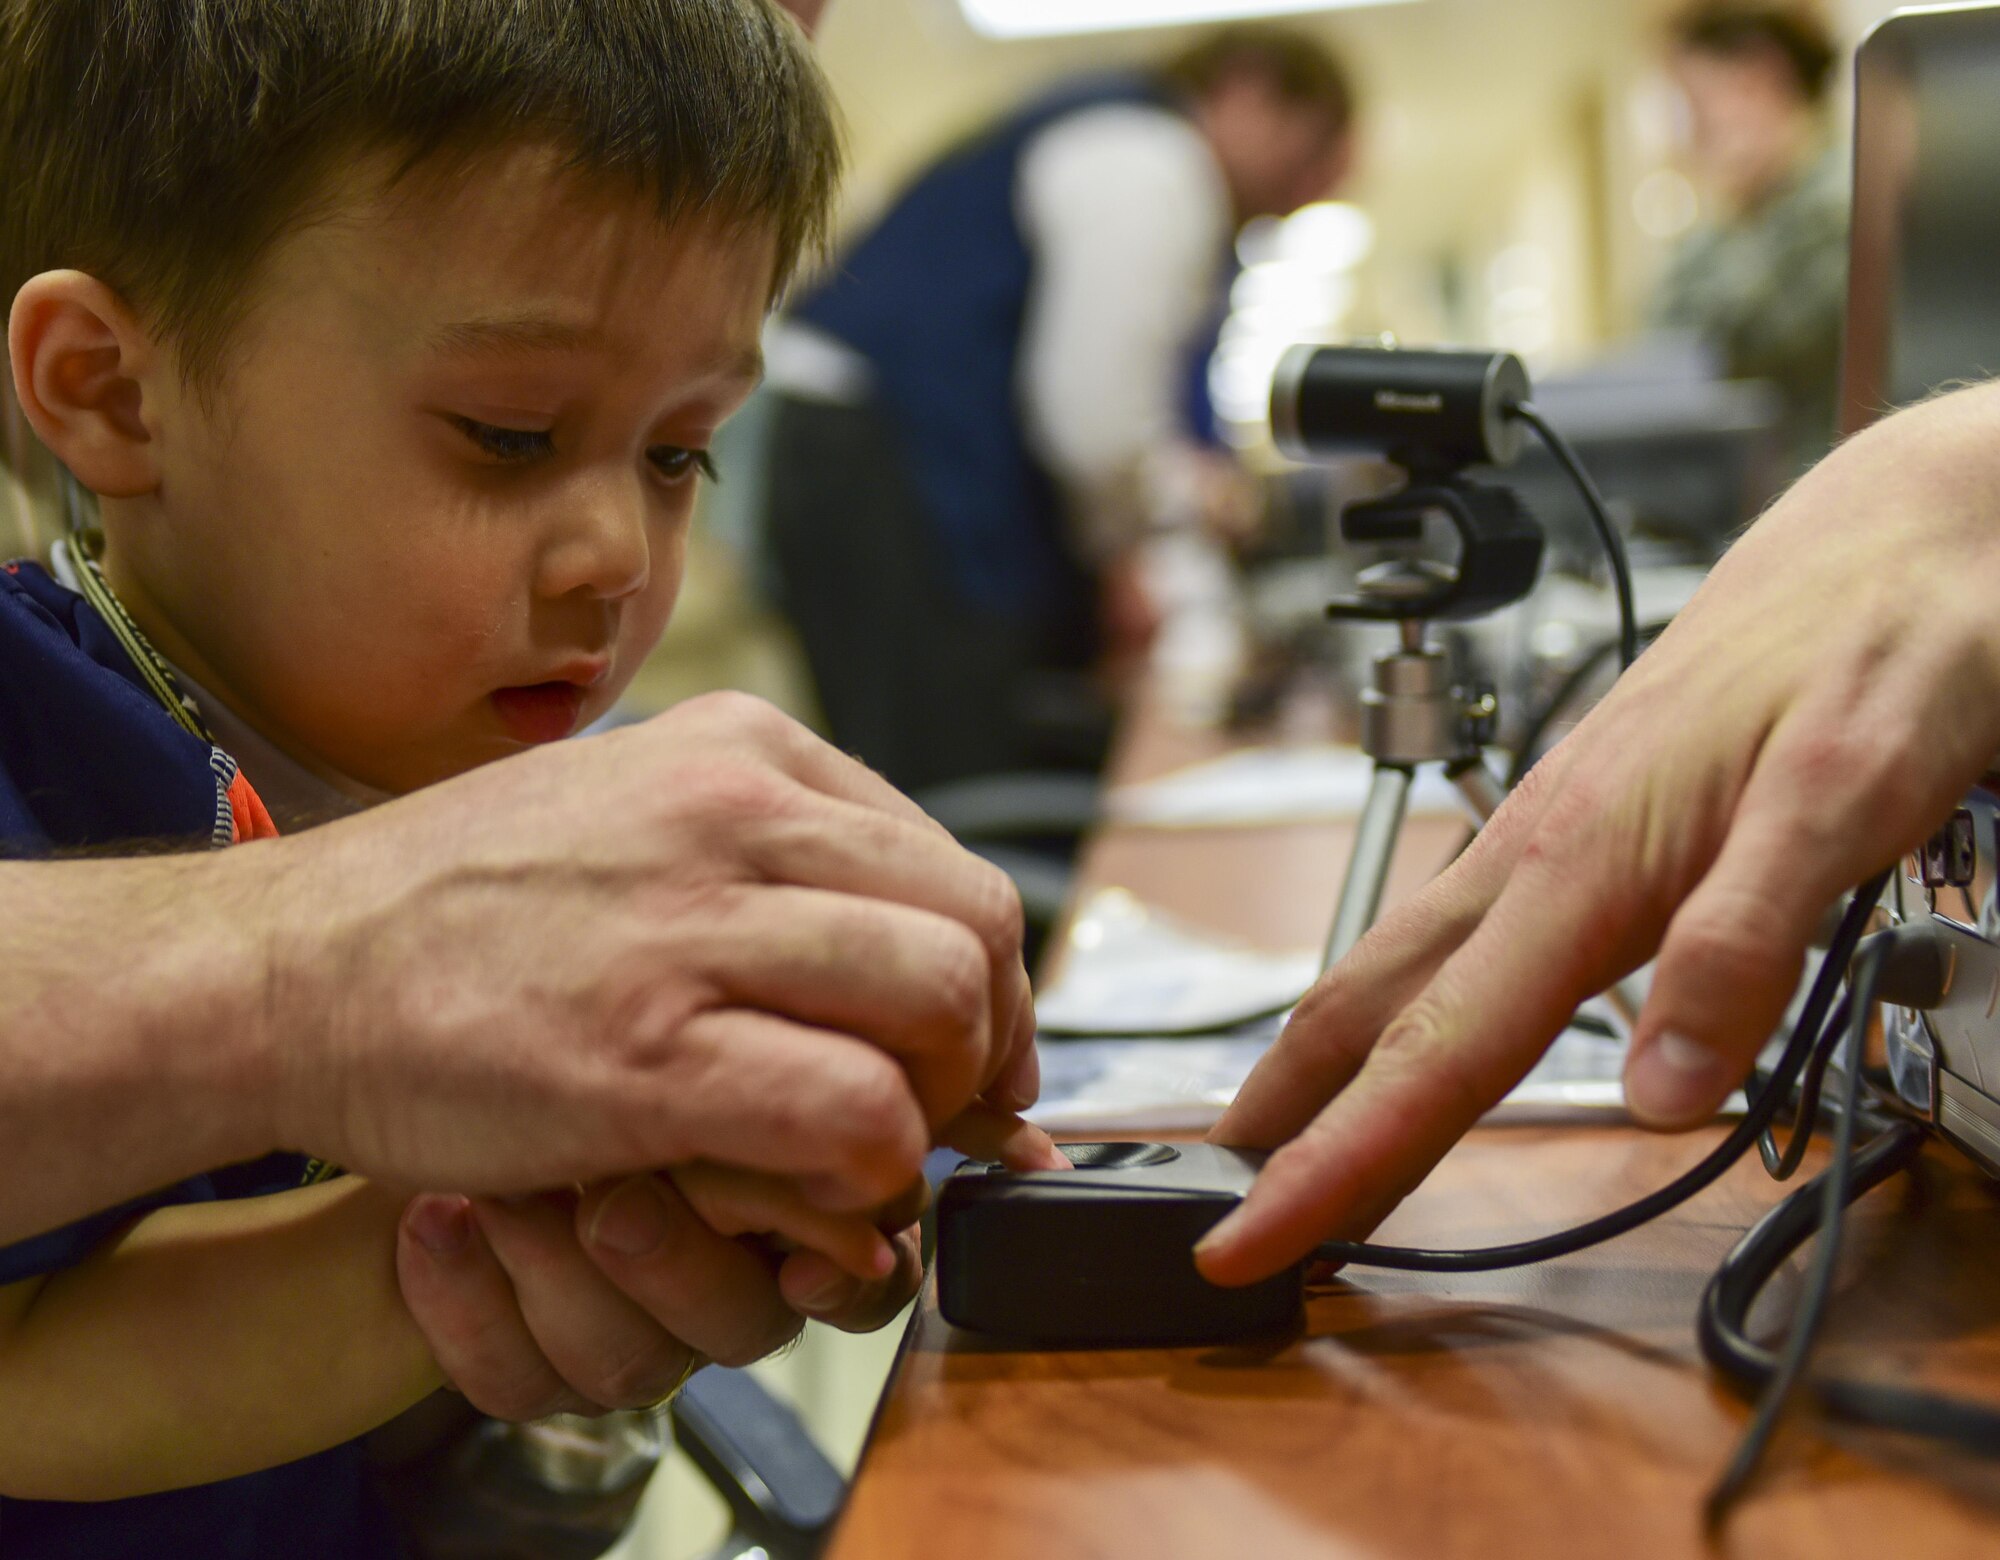 Paul Romehildt has his fingerprint scanned during the 2017 Children’s Fair inside the 28th Medical Group at Ellsworth Air Force Base, S.D., April 20, 2017. Volunteer organizations created a child-identification kit for parents using collected fingerprints, pictures and DNA. (U.S. Air Force photo by Airman 1st Class Randahl J. Jenson)